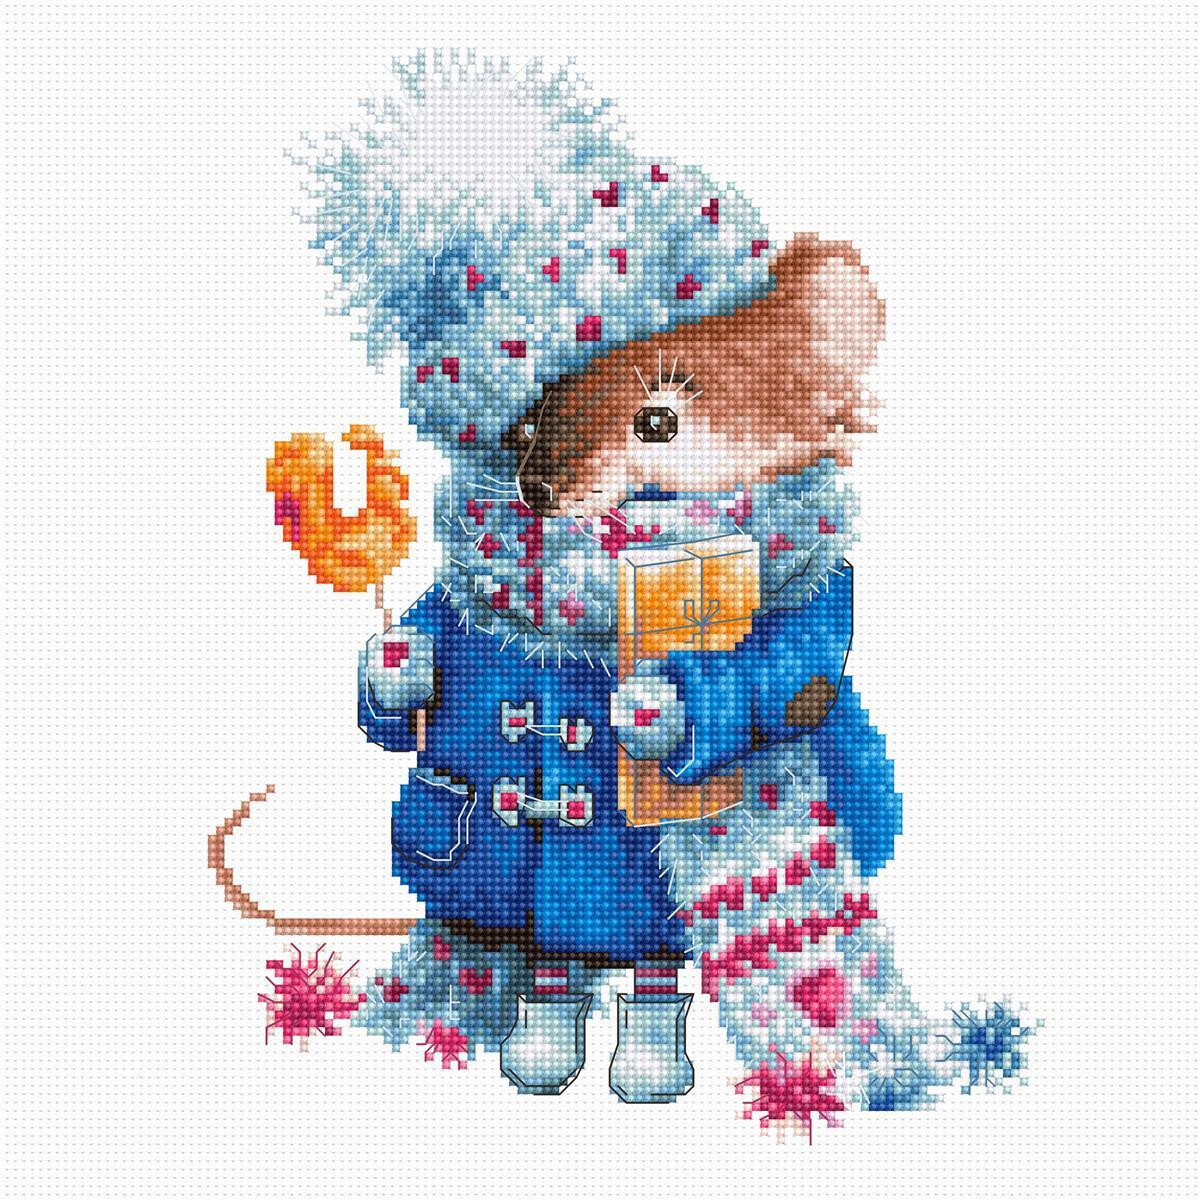 Luca-S counted Cross Stitch kit "Christmas mouse...